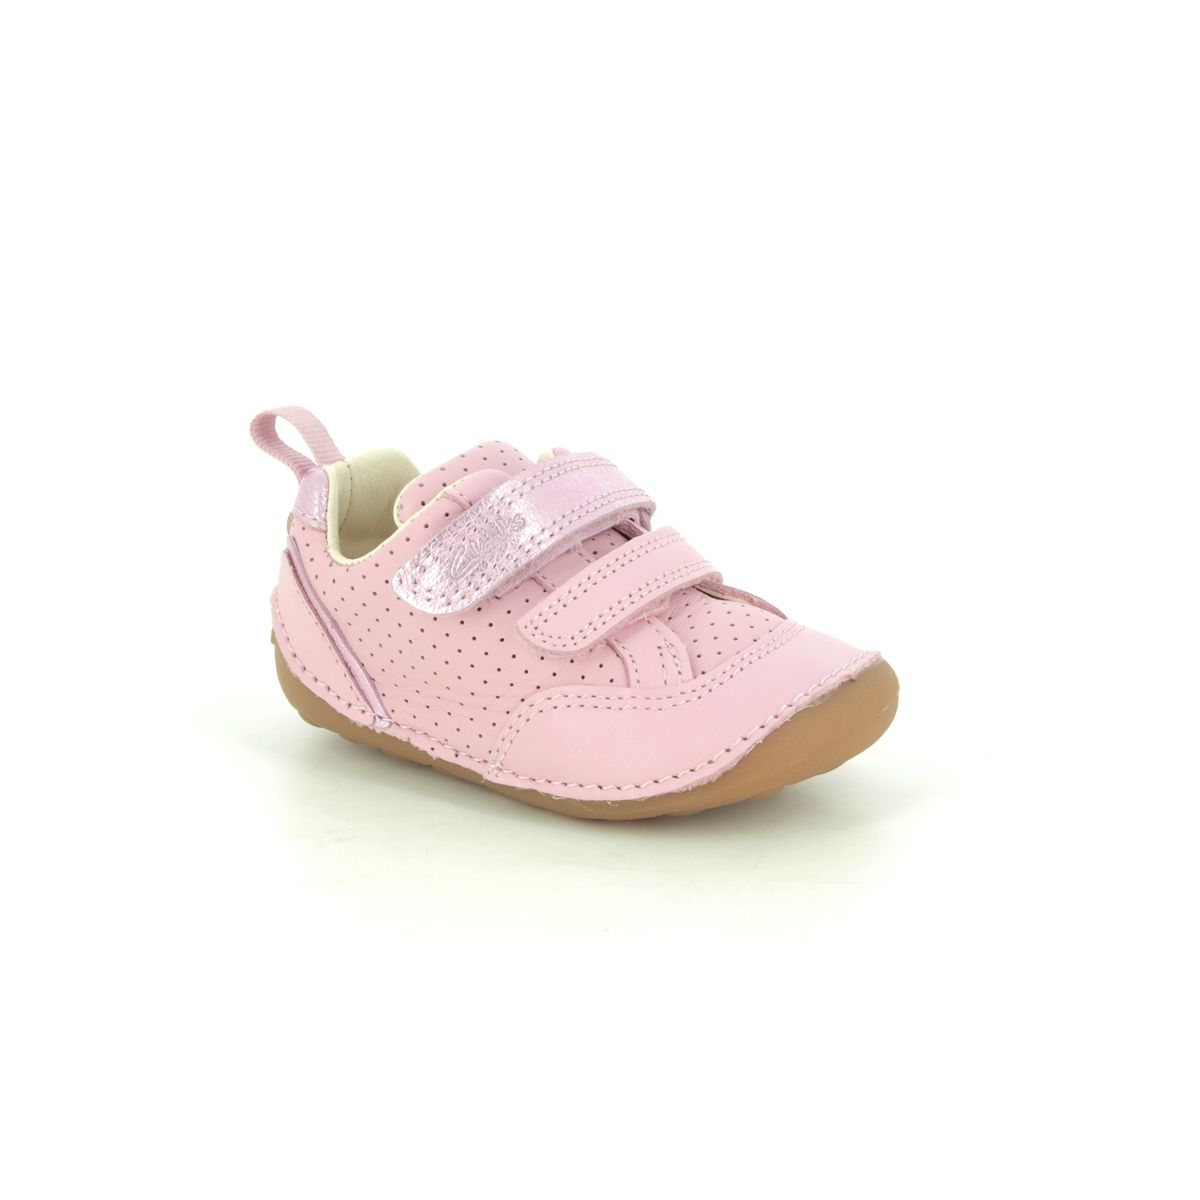 Clarks Tiny Sky T Pink Leather Kids Girls First And Baby Shoes 576287G In Size 3 In Plain Pink Leather G Width Fitting For kids